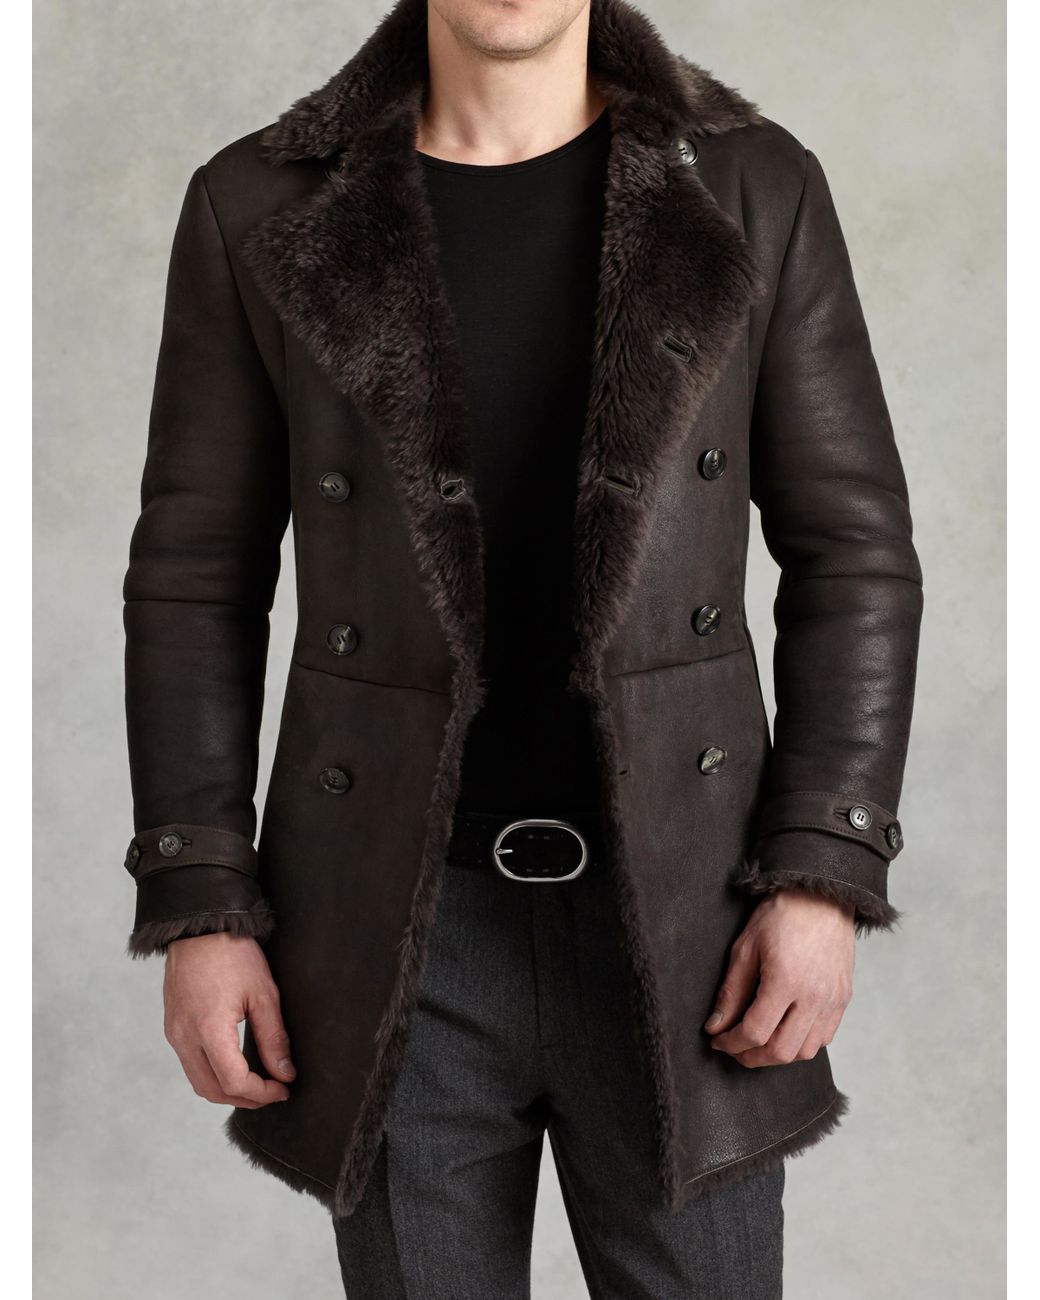 John Varvatos Double Breasted Shearling Coat in Brown for Men | Lyst